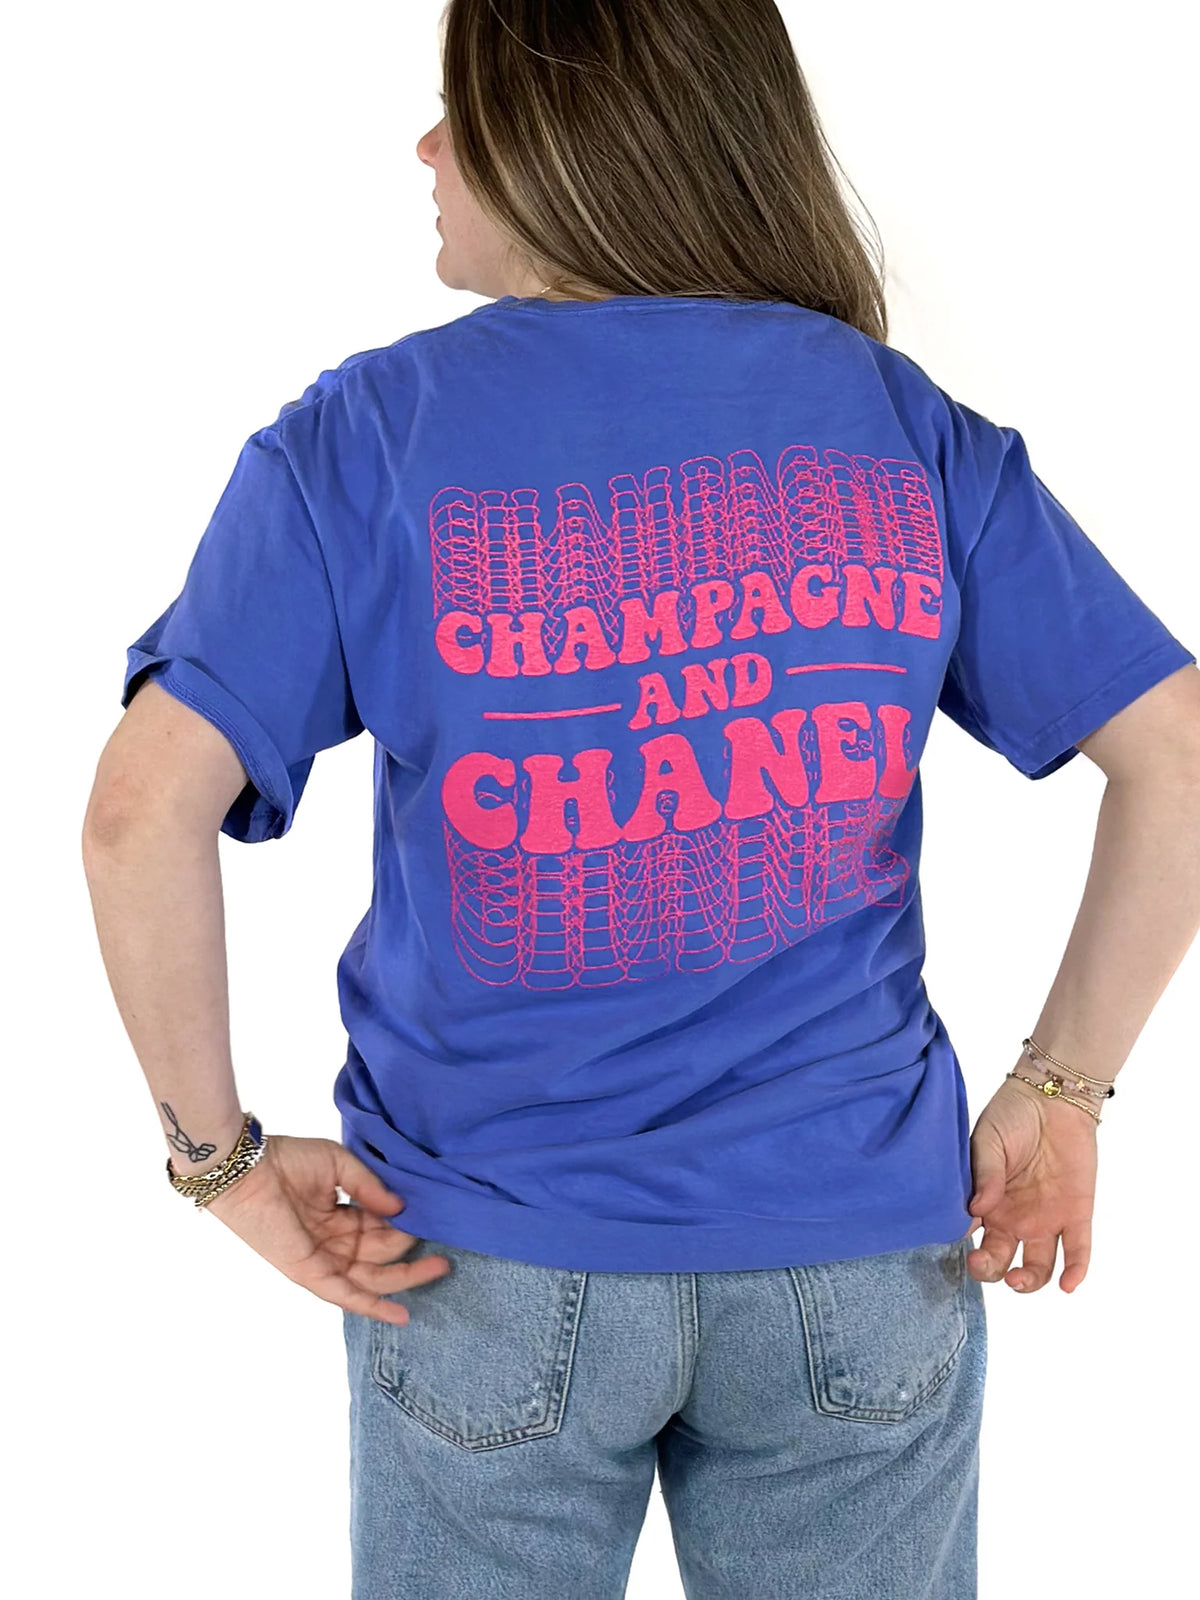 Champagne and Chanel Tee